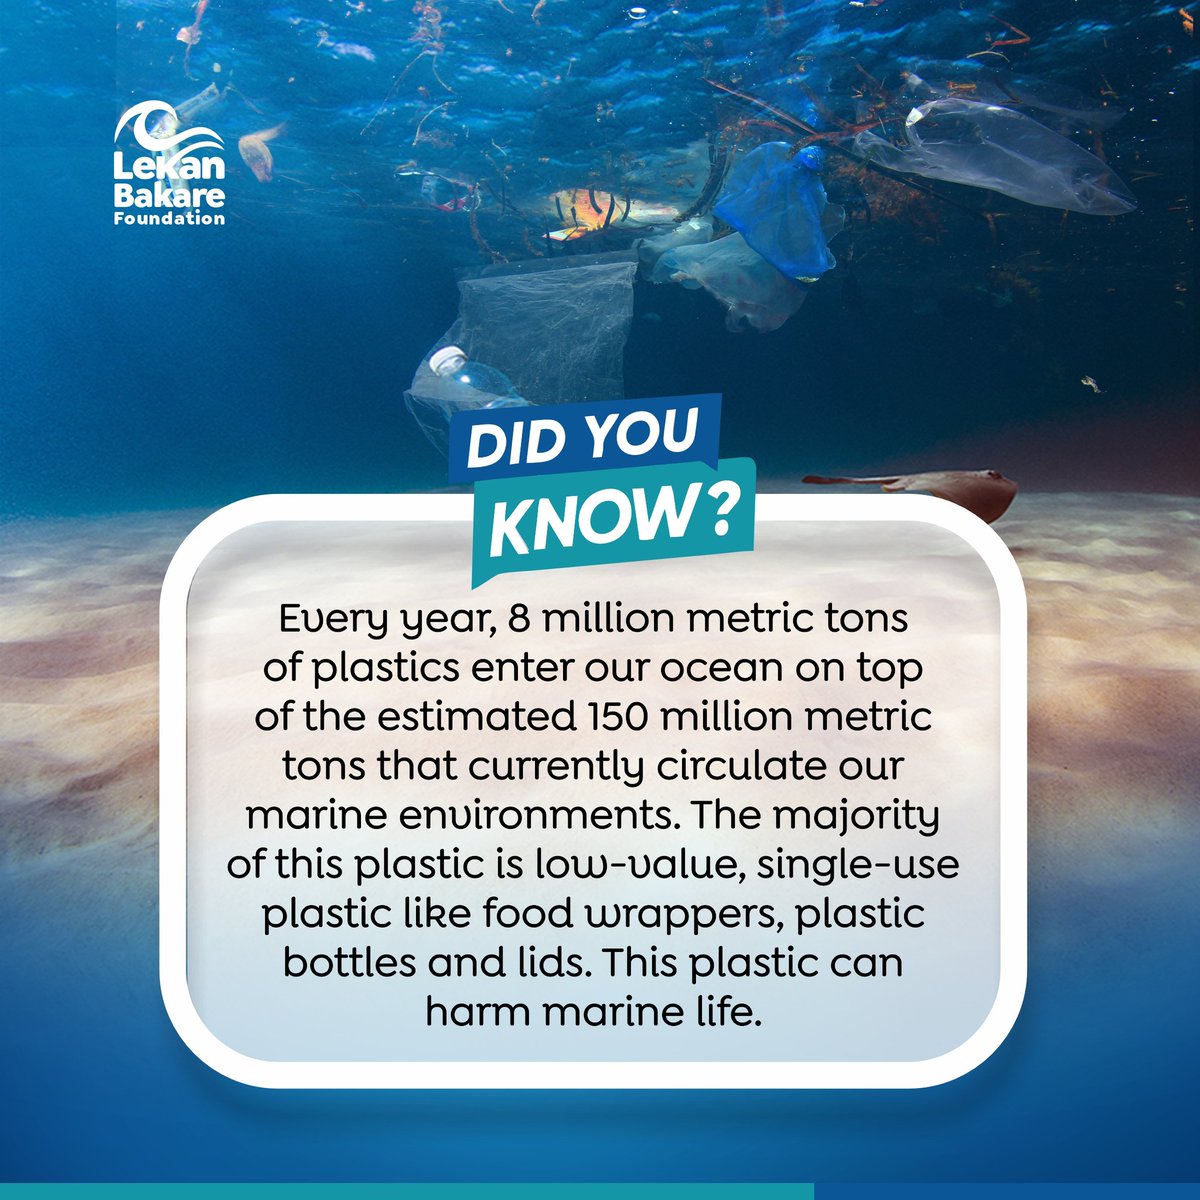 Plastic pollution can alter habitats and natural processes, reducing ecosystems'ability to adapt to climate change, directly affecting millions of people's livelihoods, food production capabilities and social well-being.
#SDG14 #ProtectTheBluePlanet #LifeBelowWater #MPAs